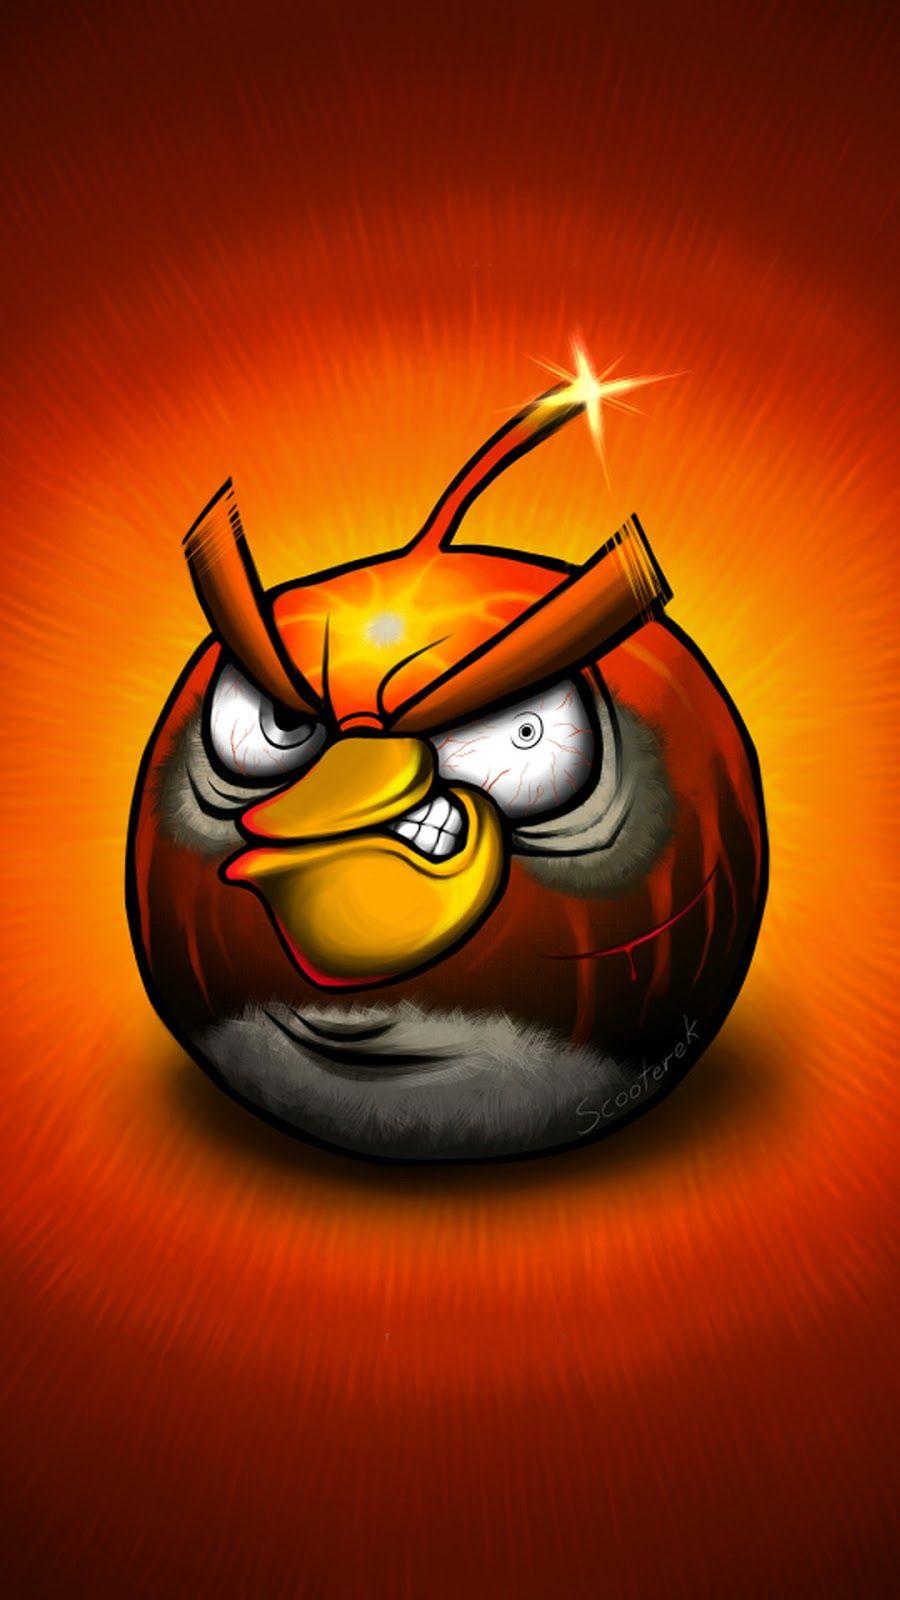 Android Wallpaper of Angry Birds